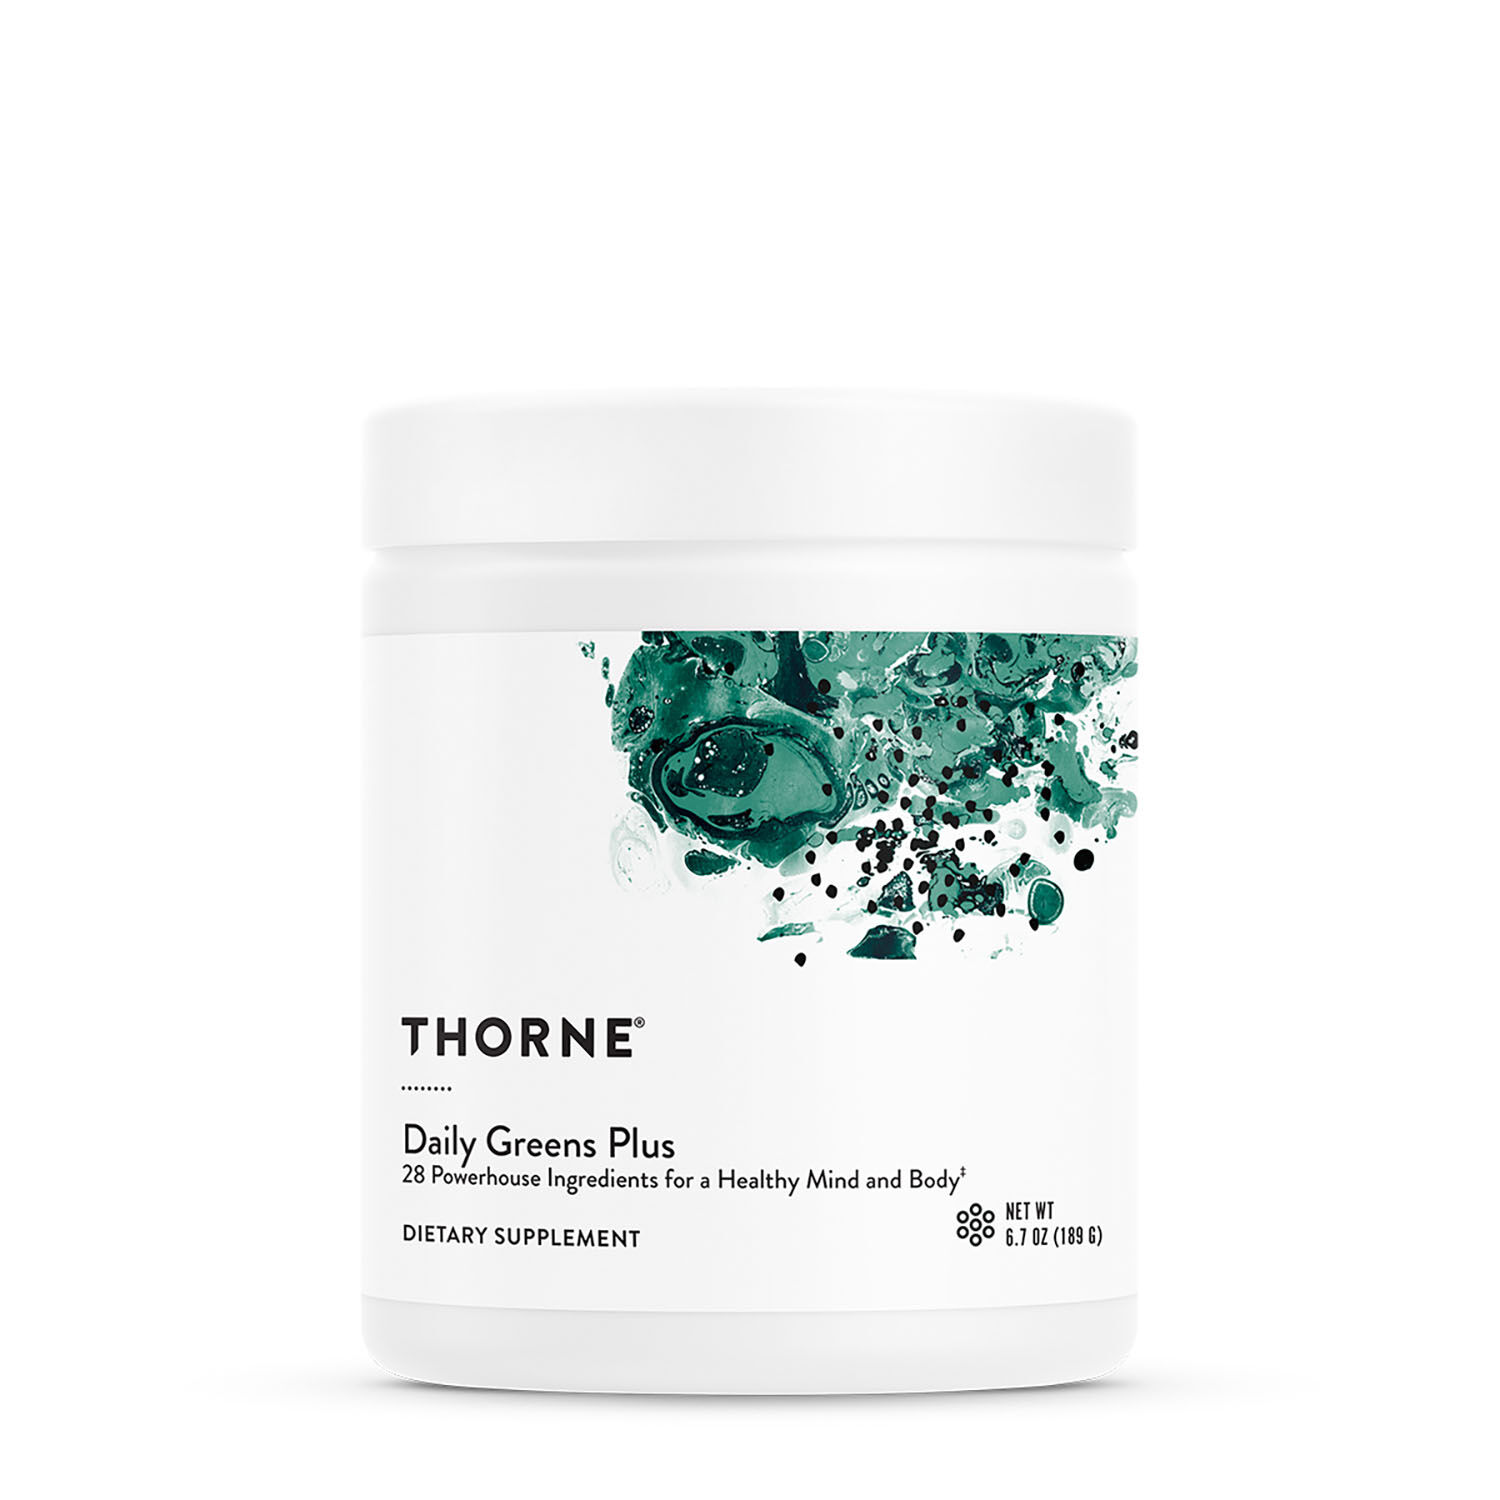 Daily Greens Plus  Thorne + Again Faster